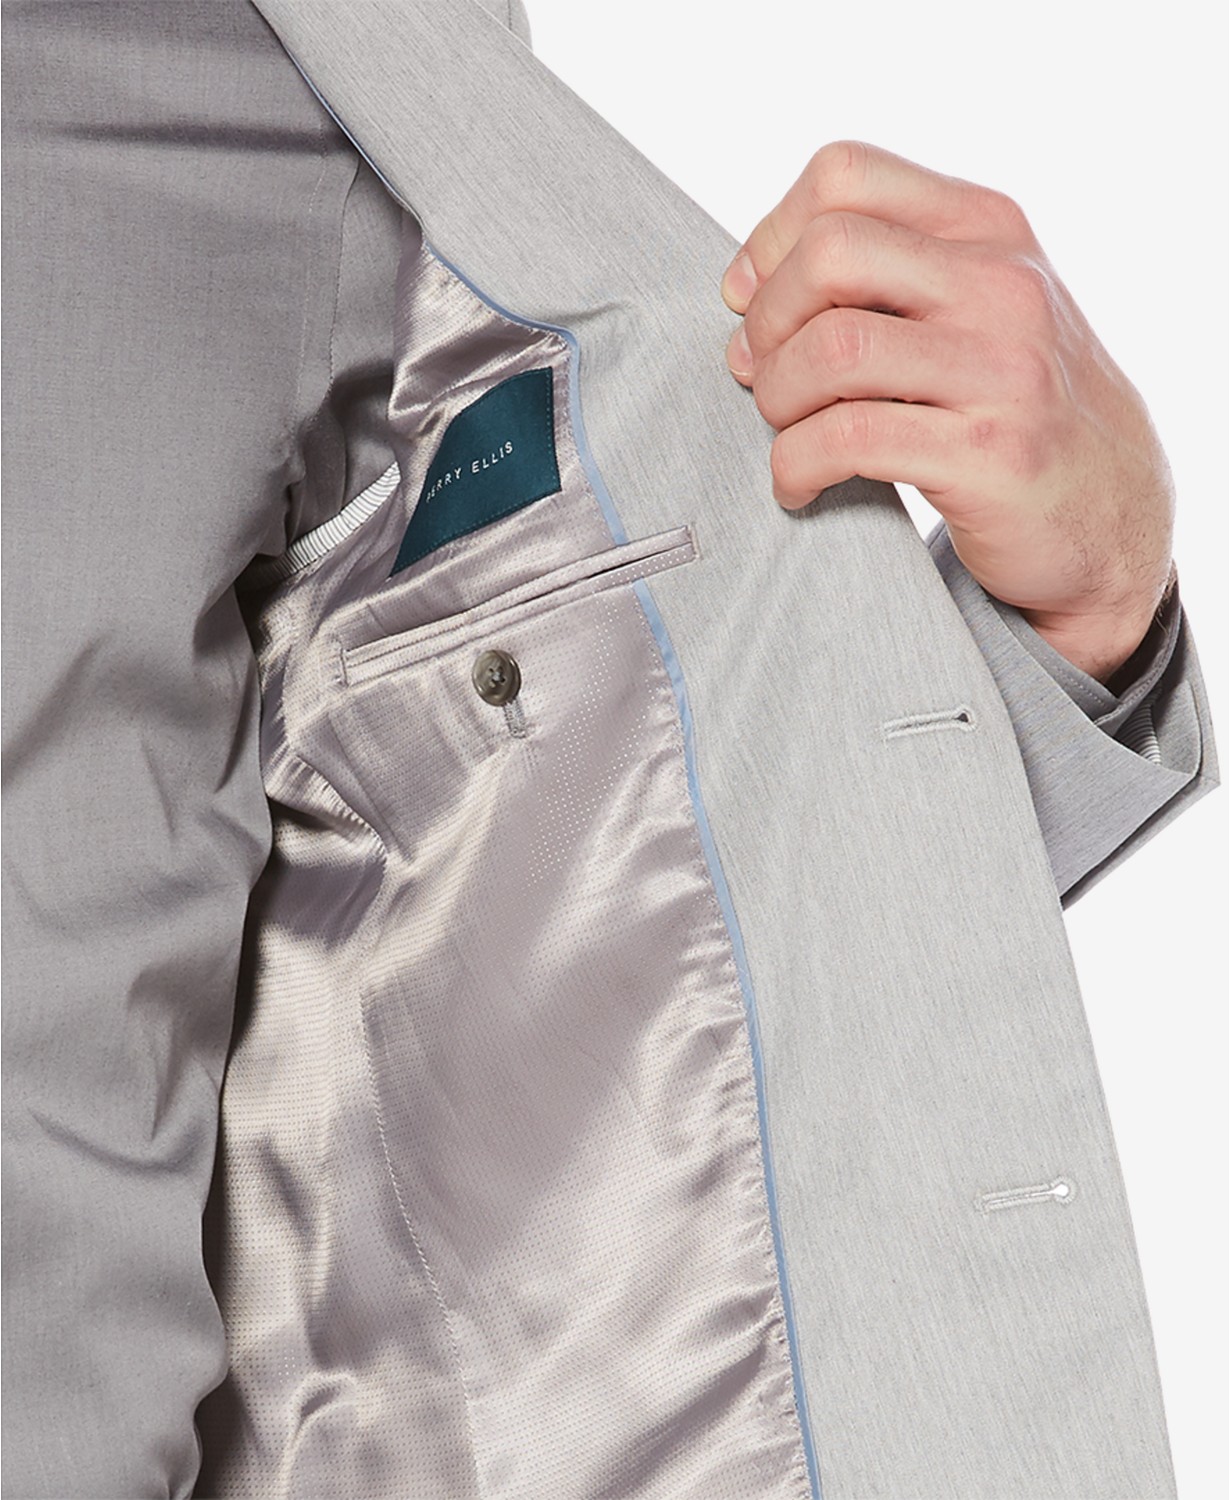 Perry Ellis Mens Heathered Two Button Blazer Jacket - image 3 of 6